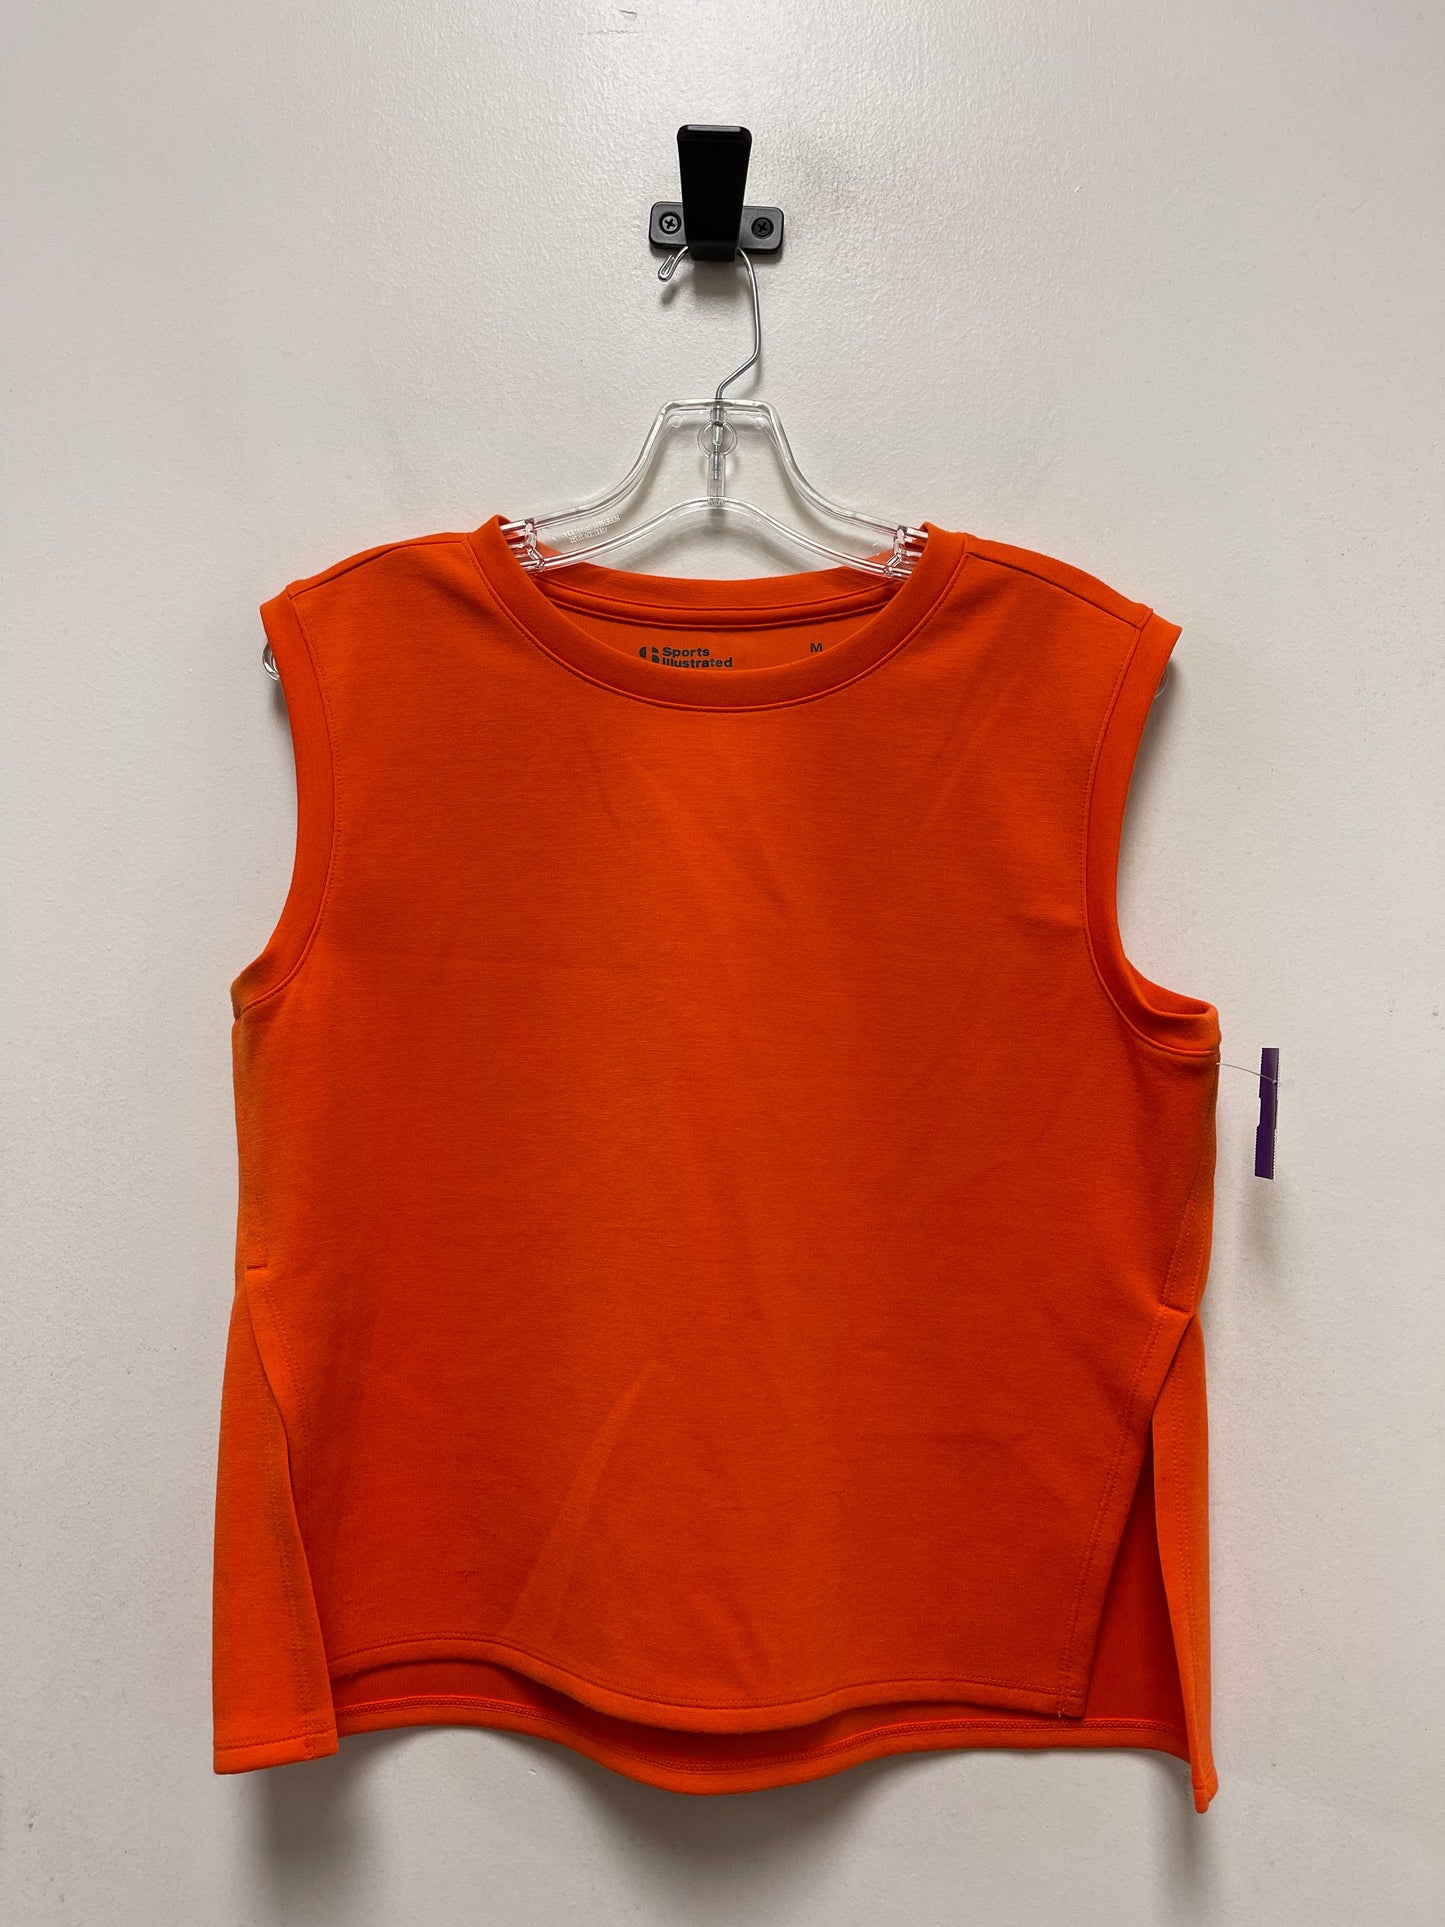 Orange Athletic Top Short Sleeve Clothes Mentor, Size M